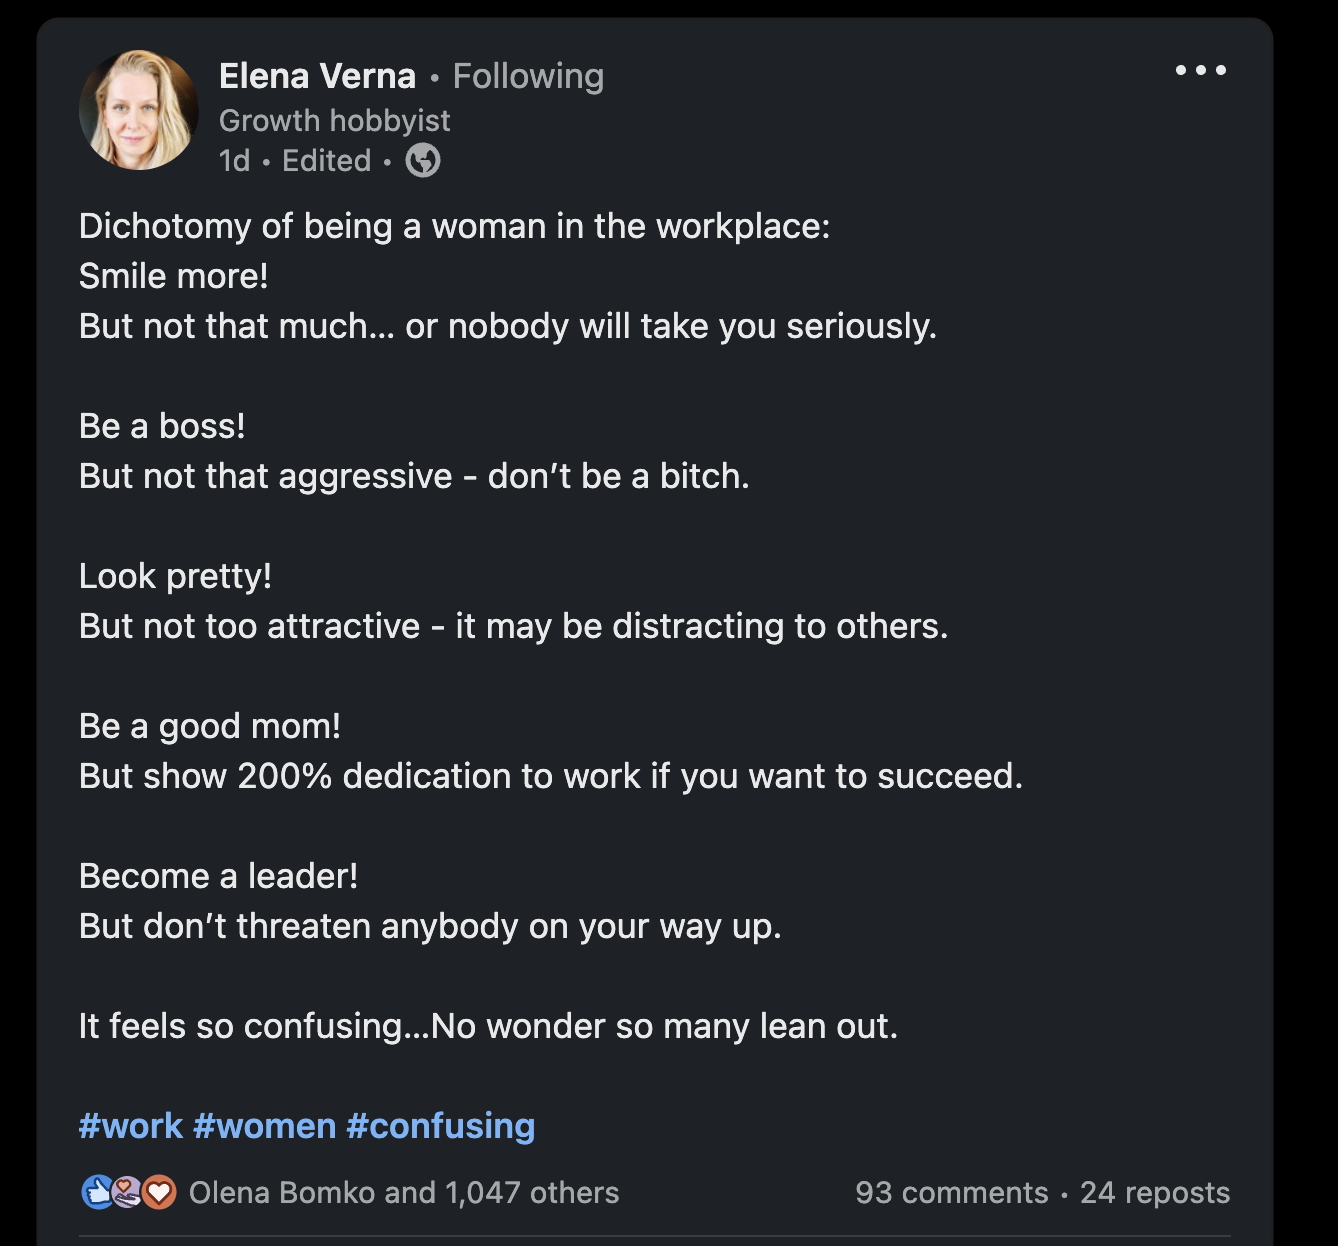 Elena Verna's recent LinkedIn post discussing the toxic expectations that many women still encounter in their careers.